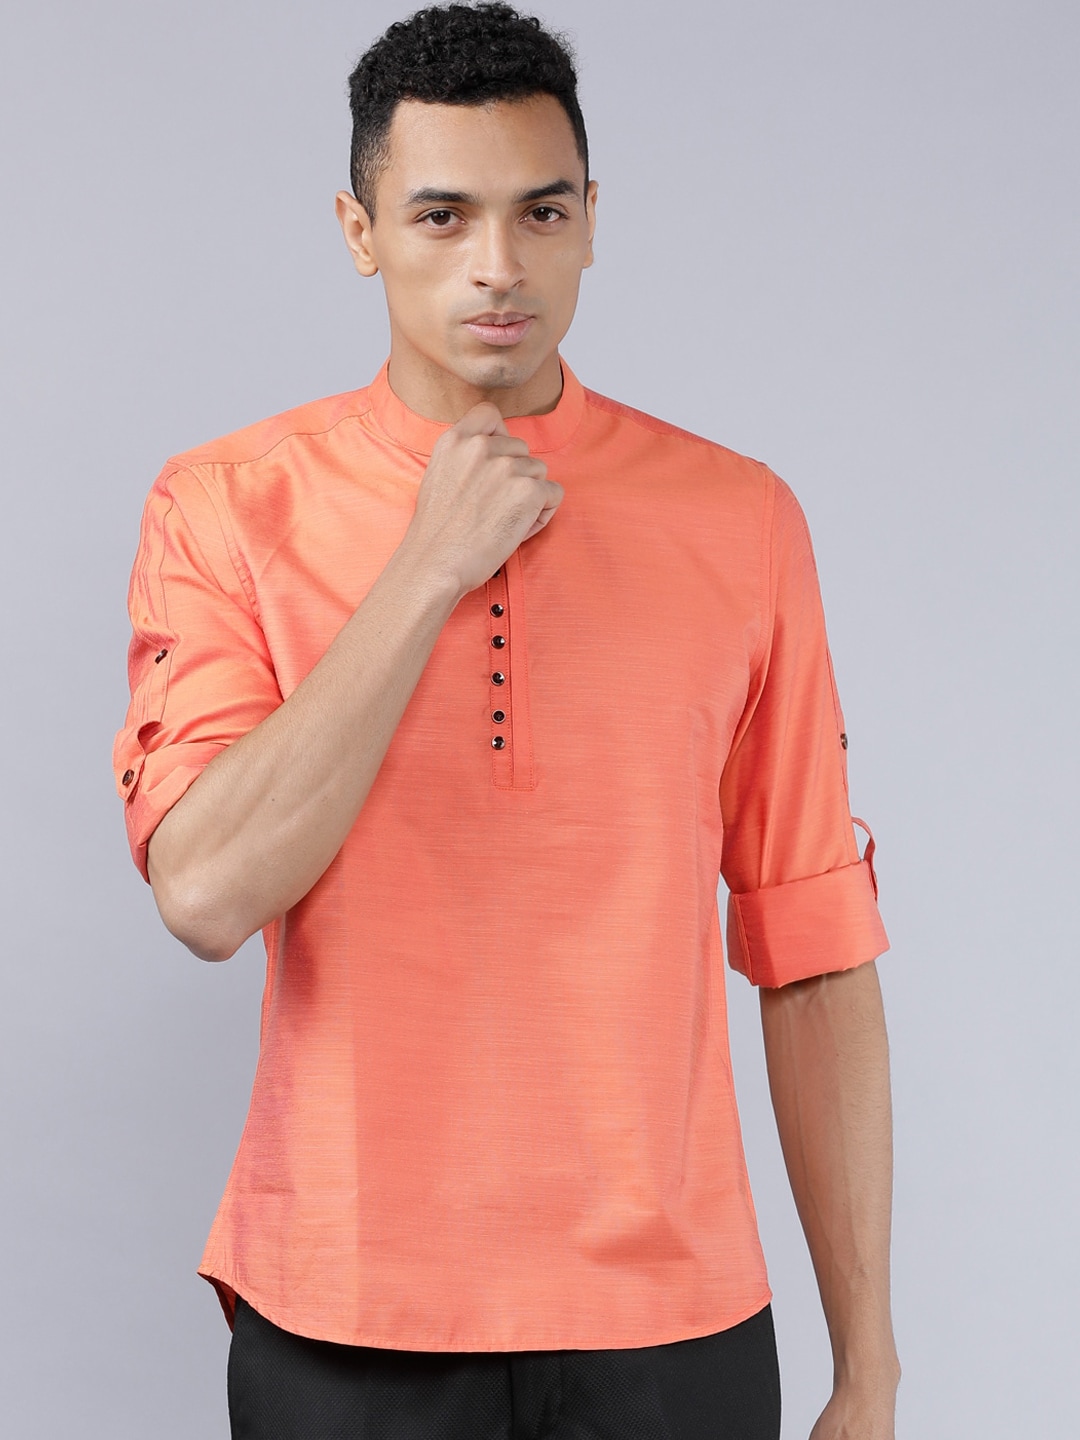 Highlander shirts starting from Rs.217